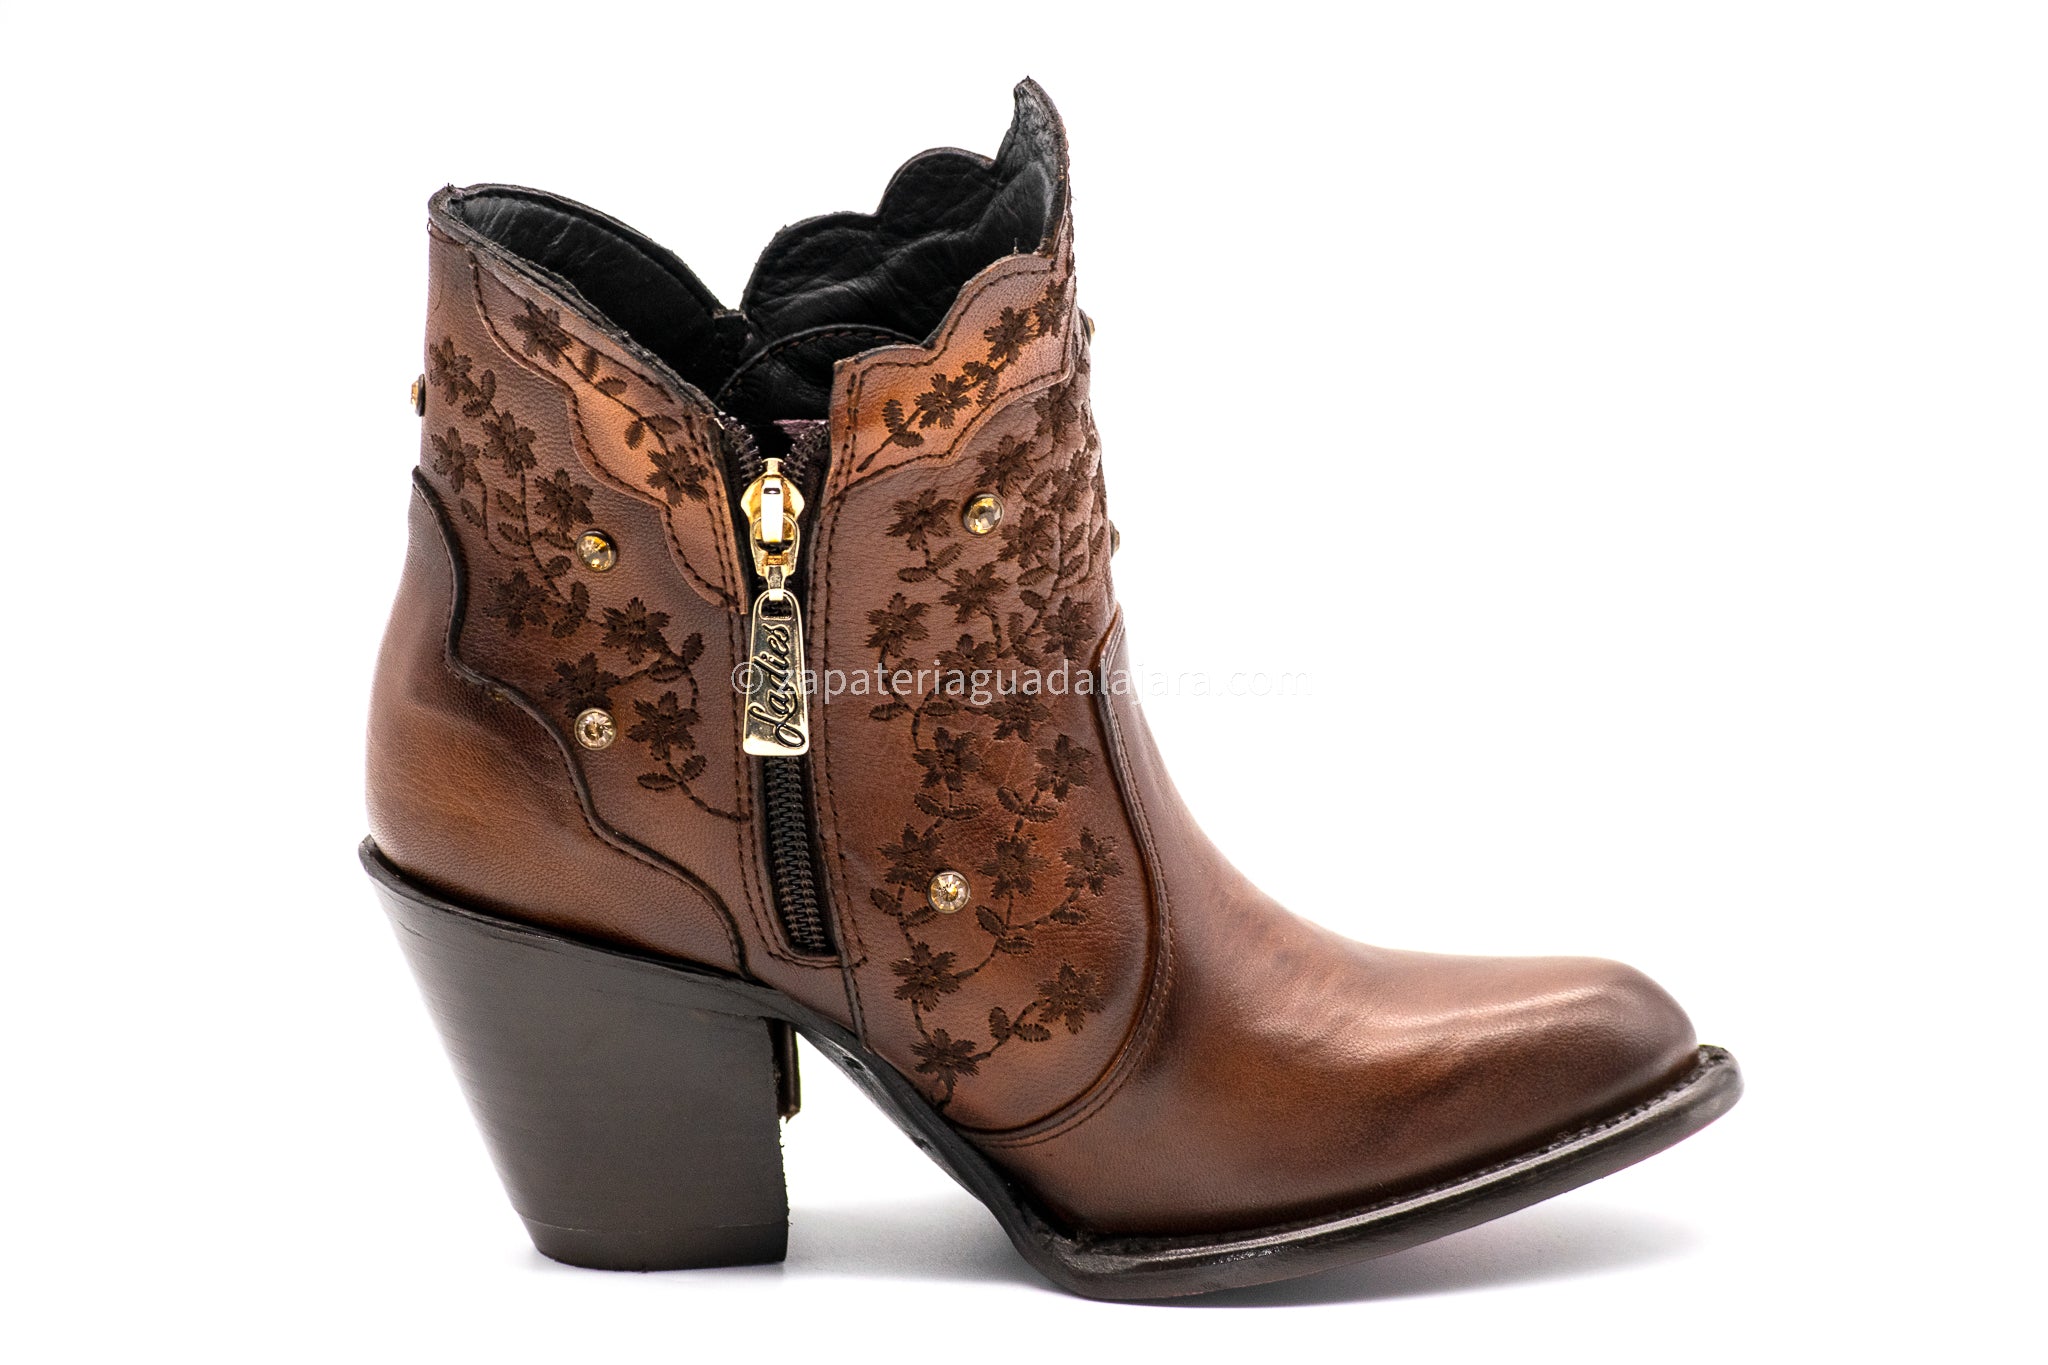 QC-252 RODEO BELT HONEY  Genuine Leather Cowboy Boots and Hats — Zapateria  Guadalajara